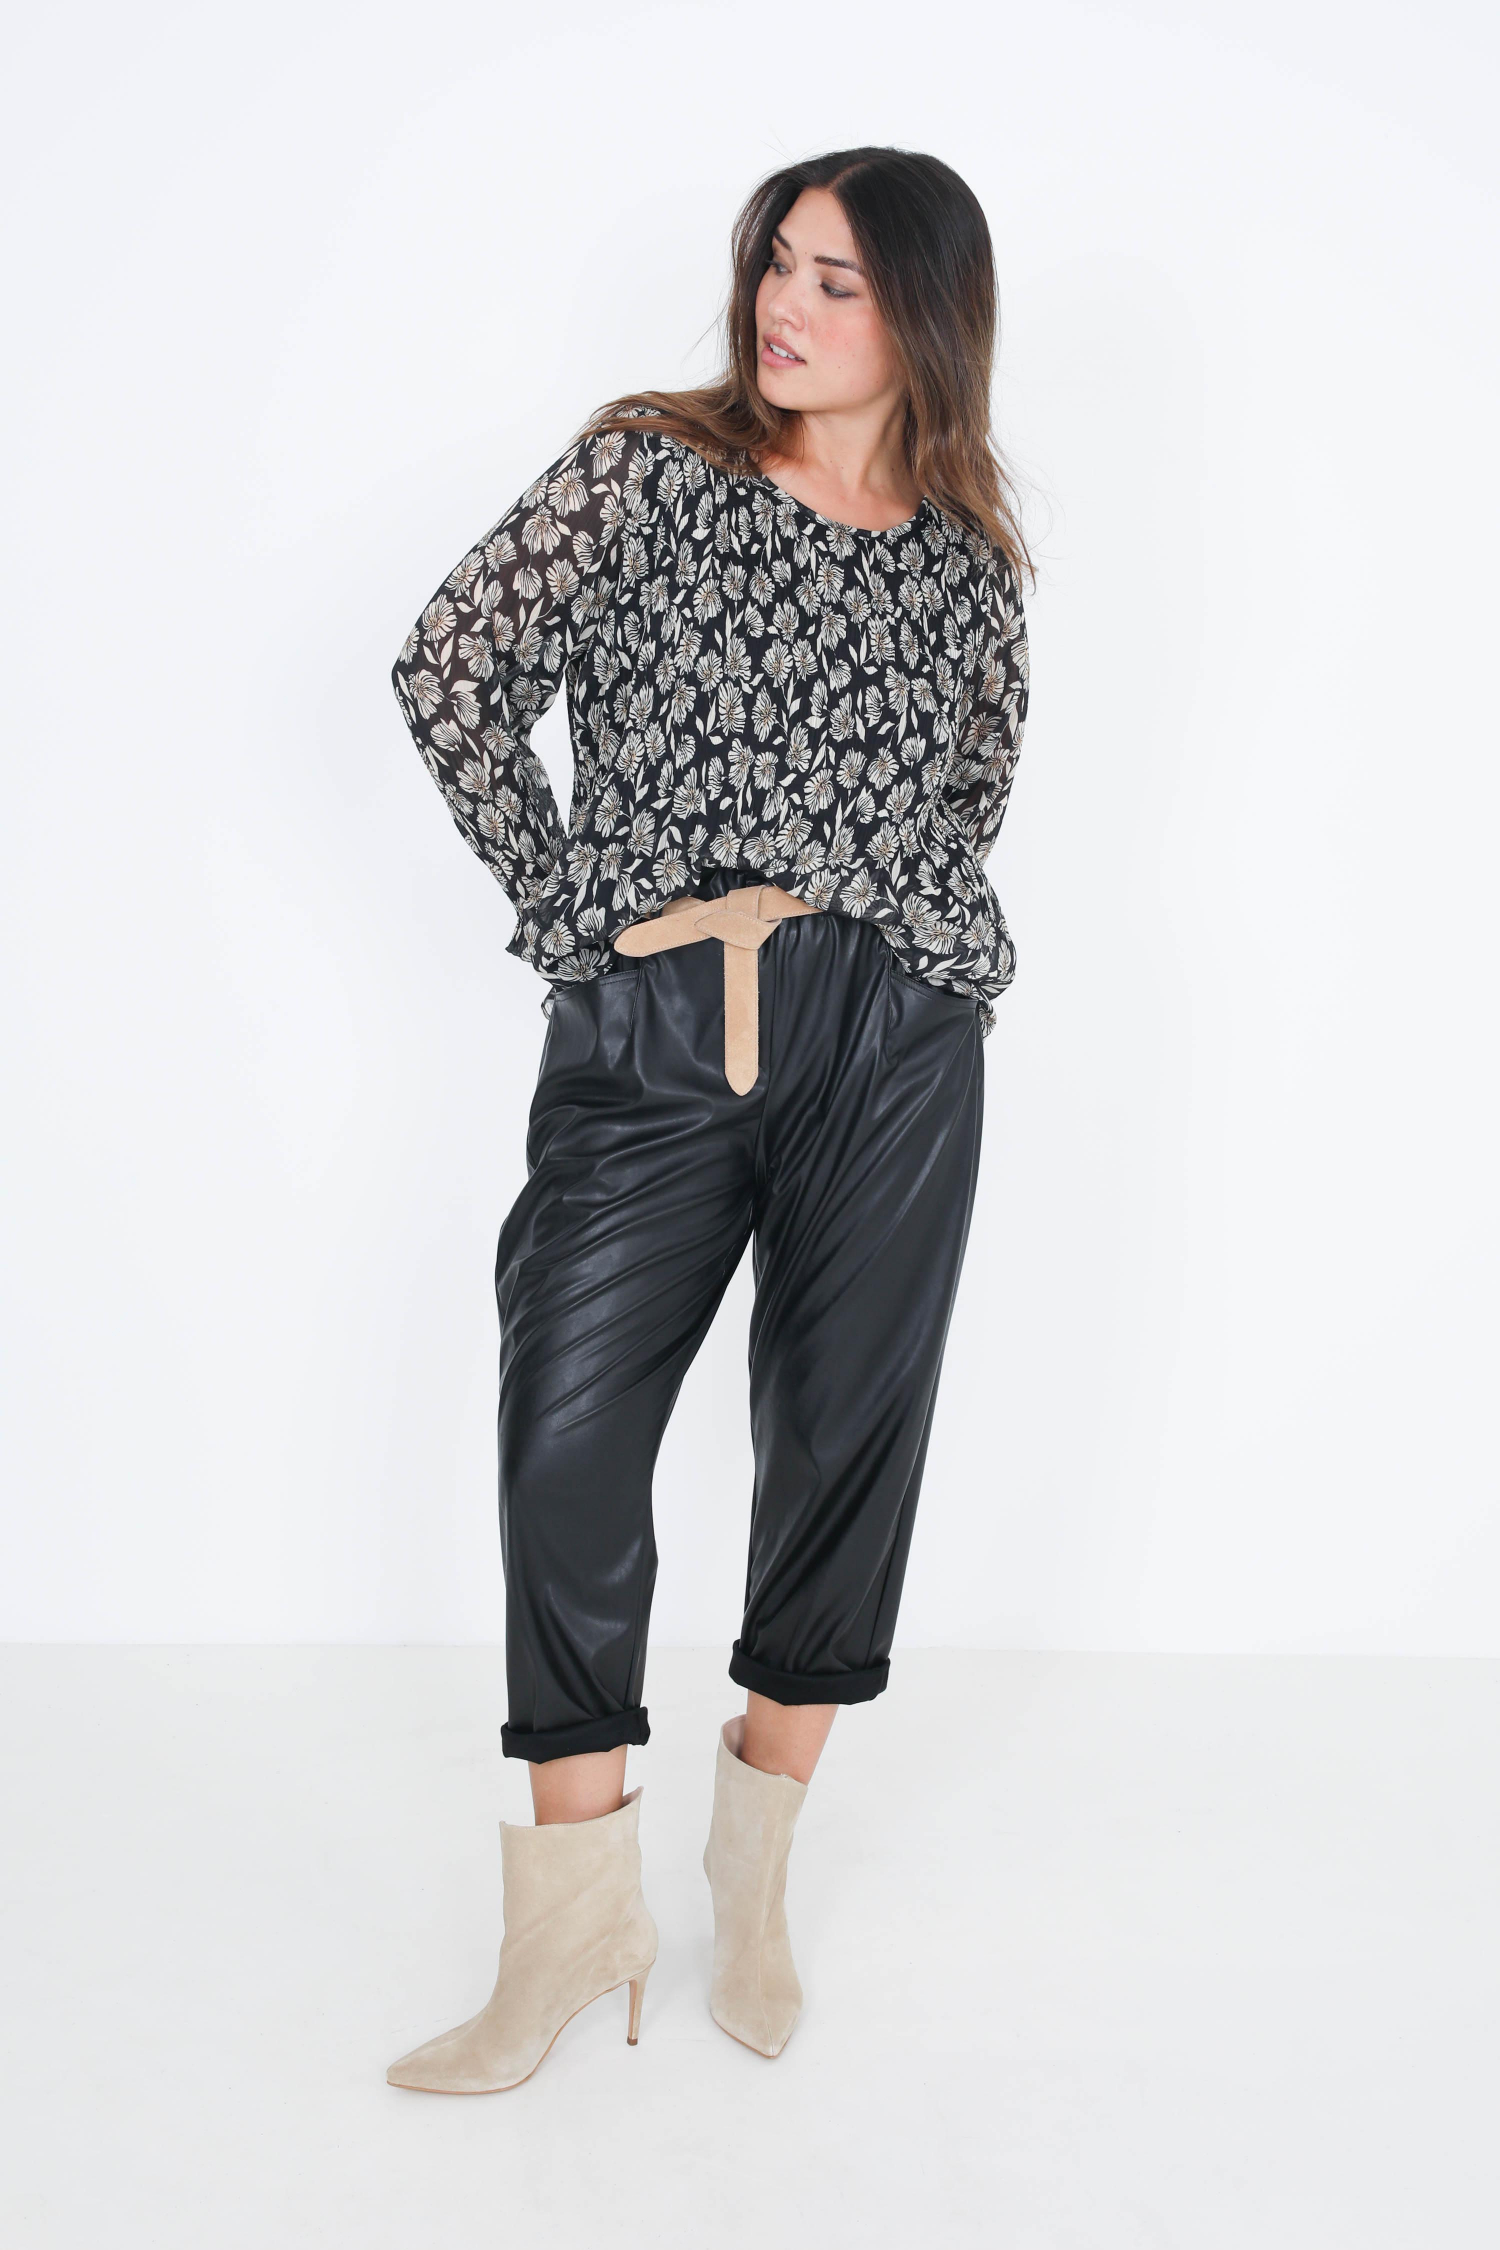 High-waisted faux leather pants